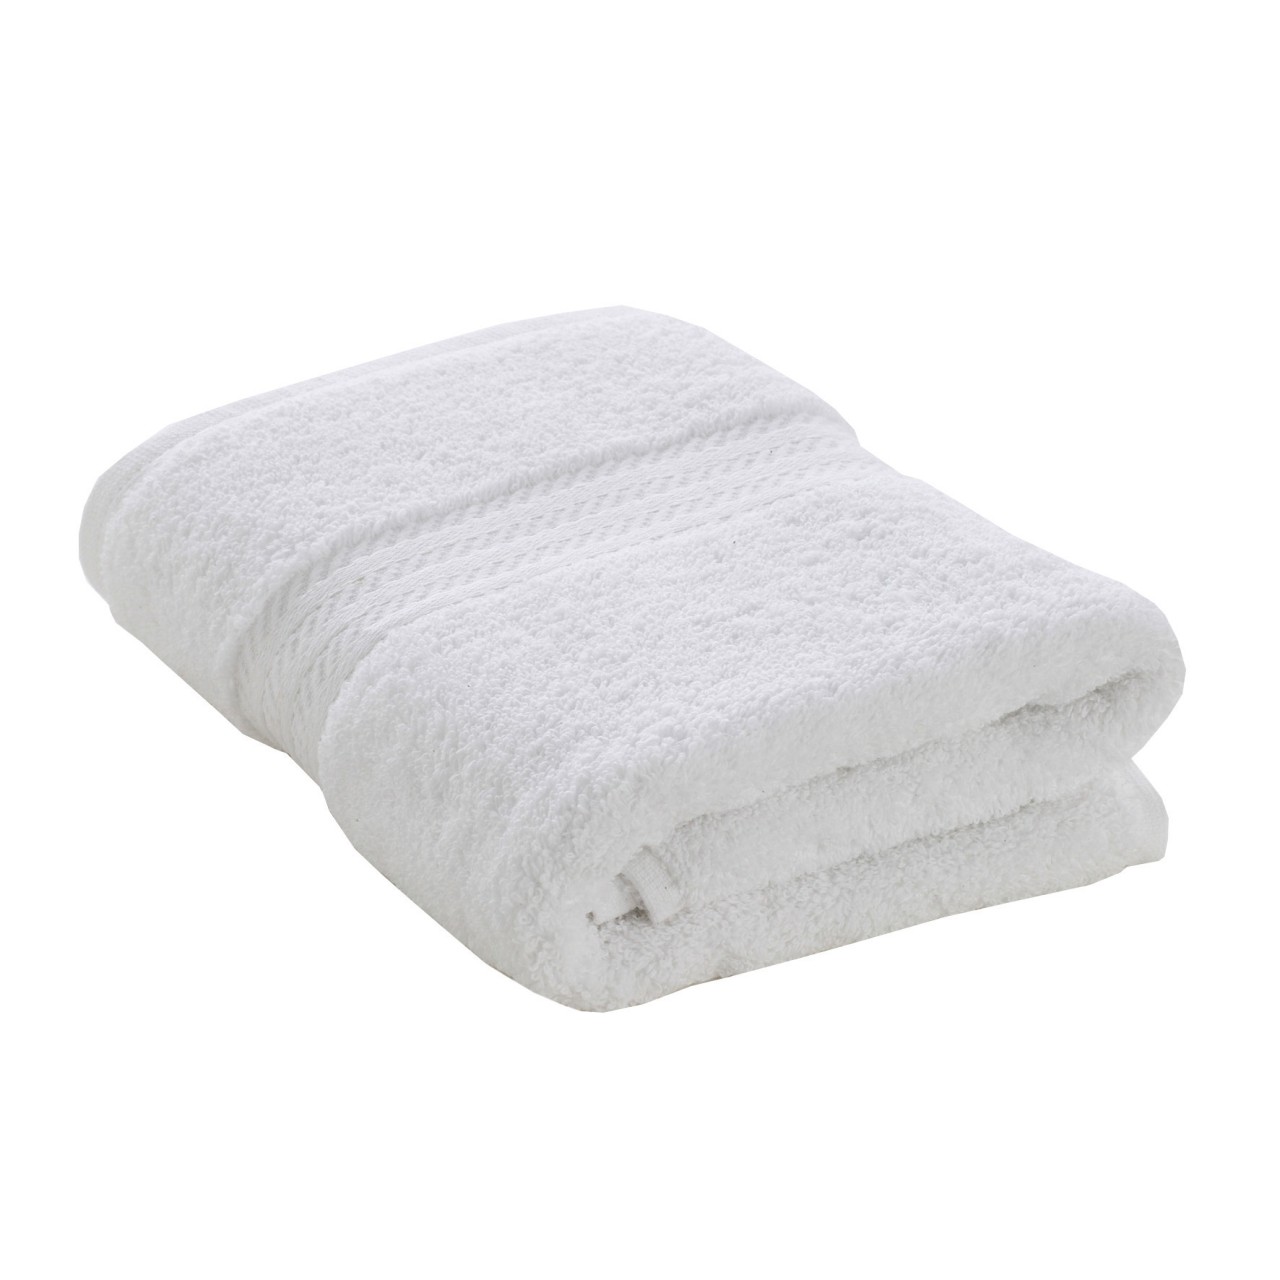 Supreme Cotton Turkish Towels - Buy One Get One Free